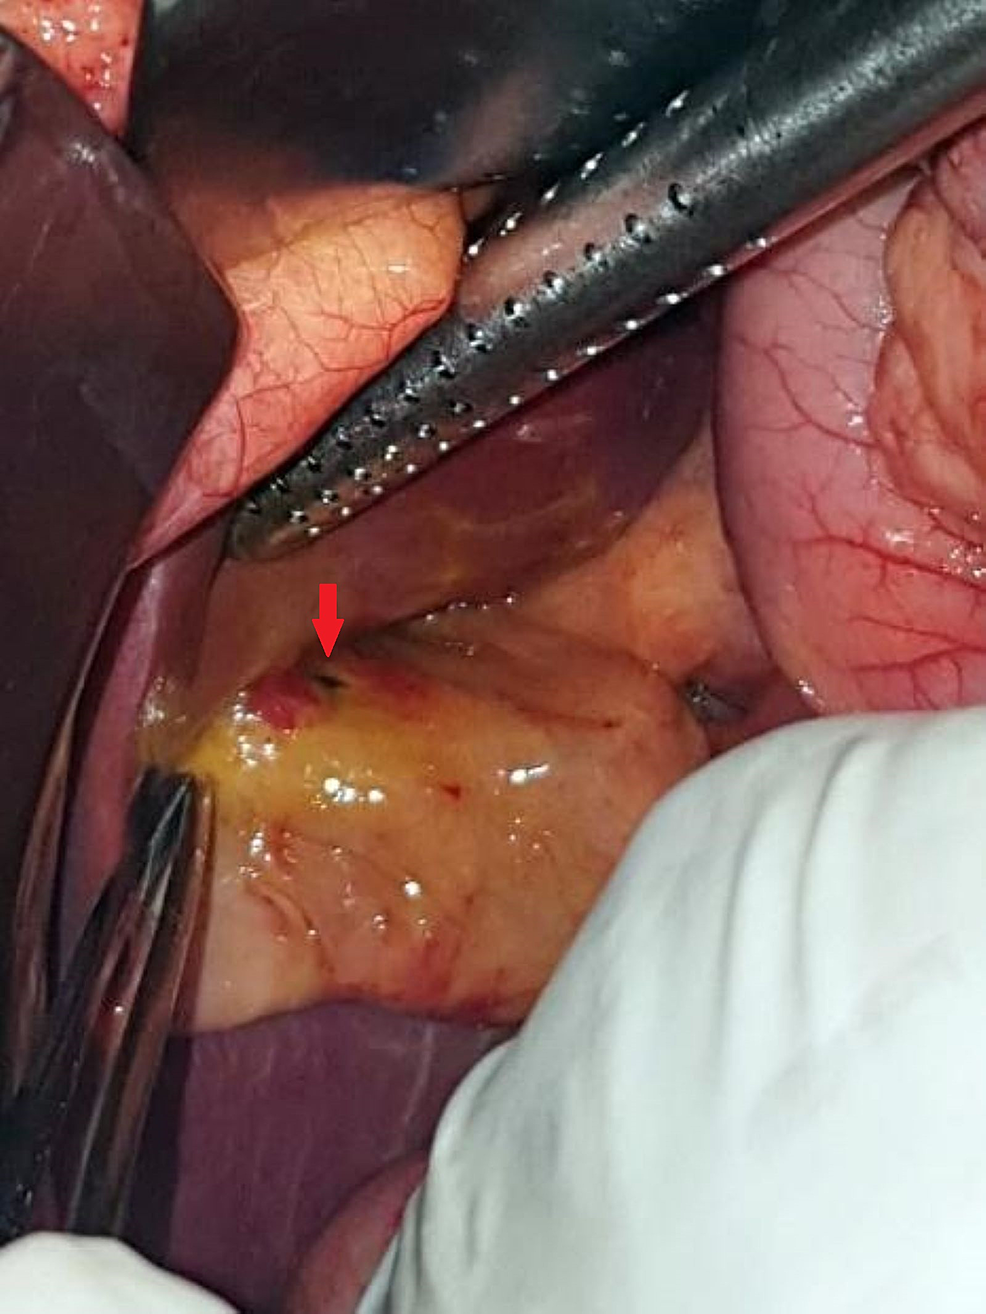 Intraoperative-specimen-showing-a-small-pinpoint-perforation-(arrow)-of-less-than-5-mm-in-the-gallbladder.-